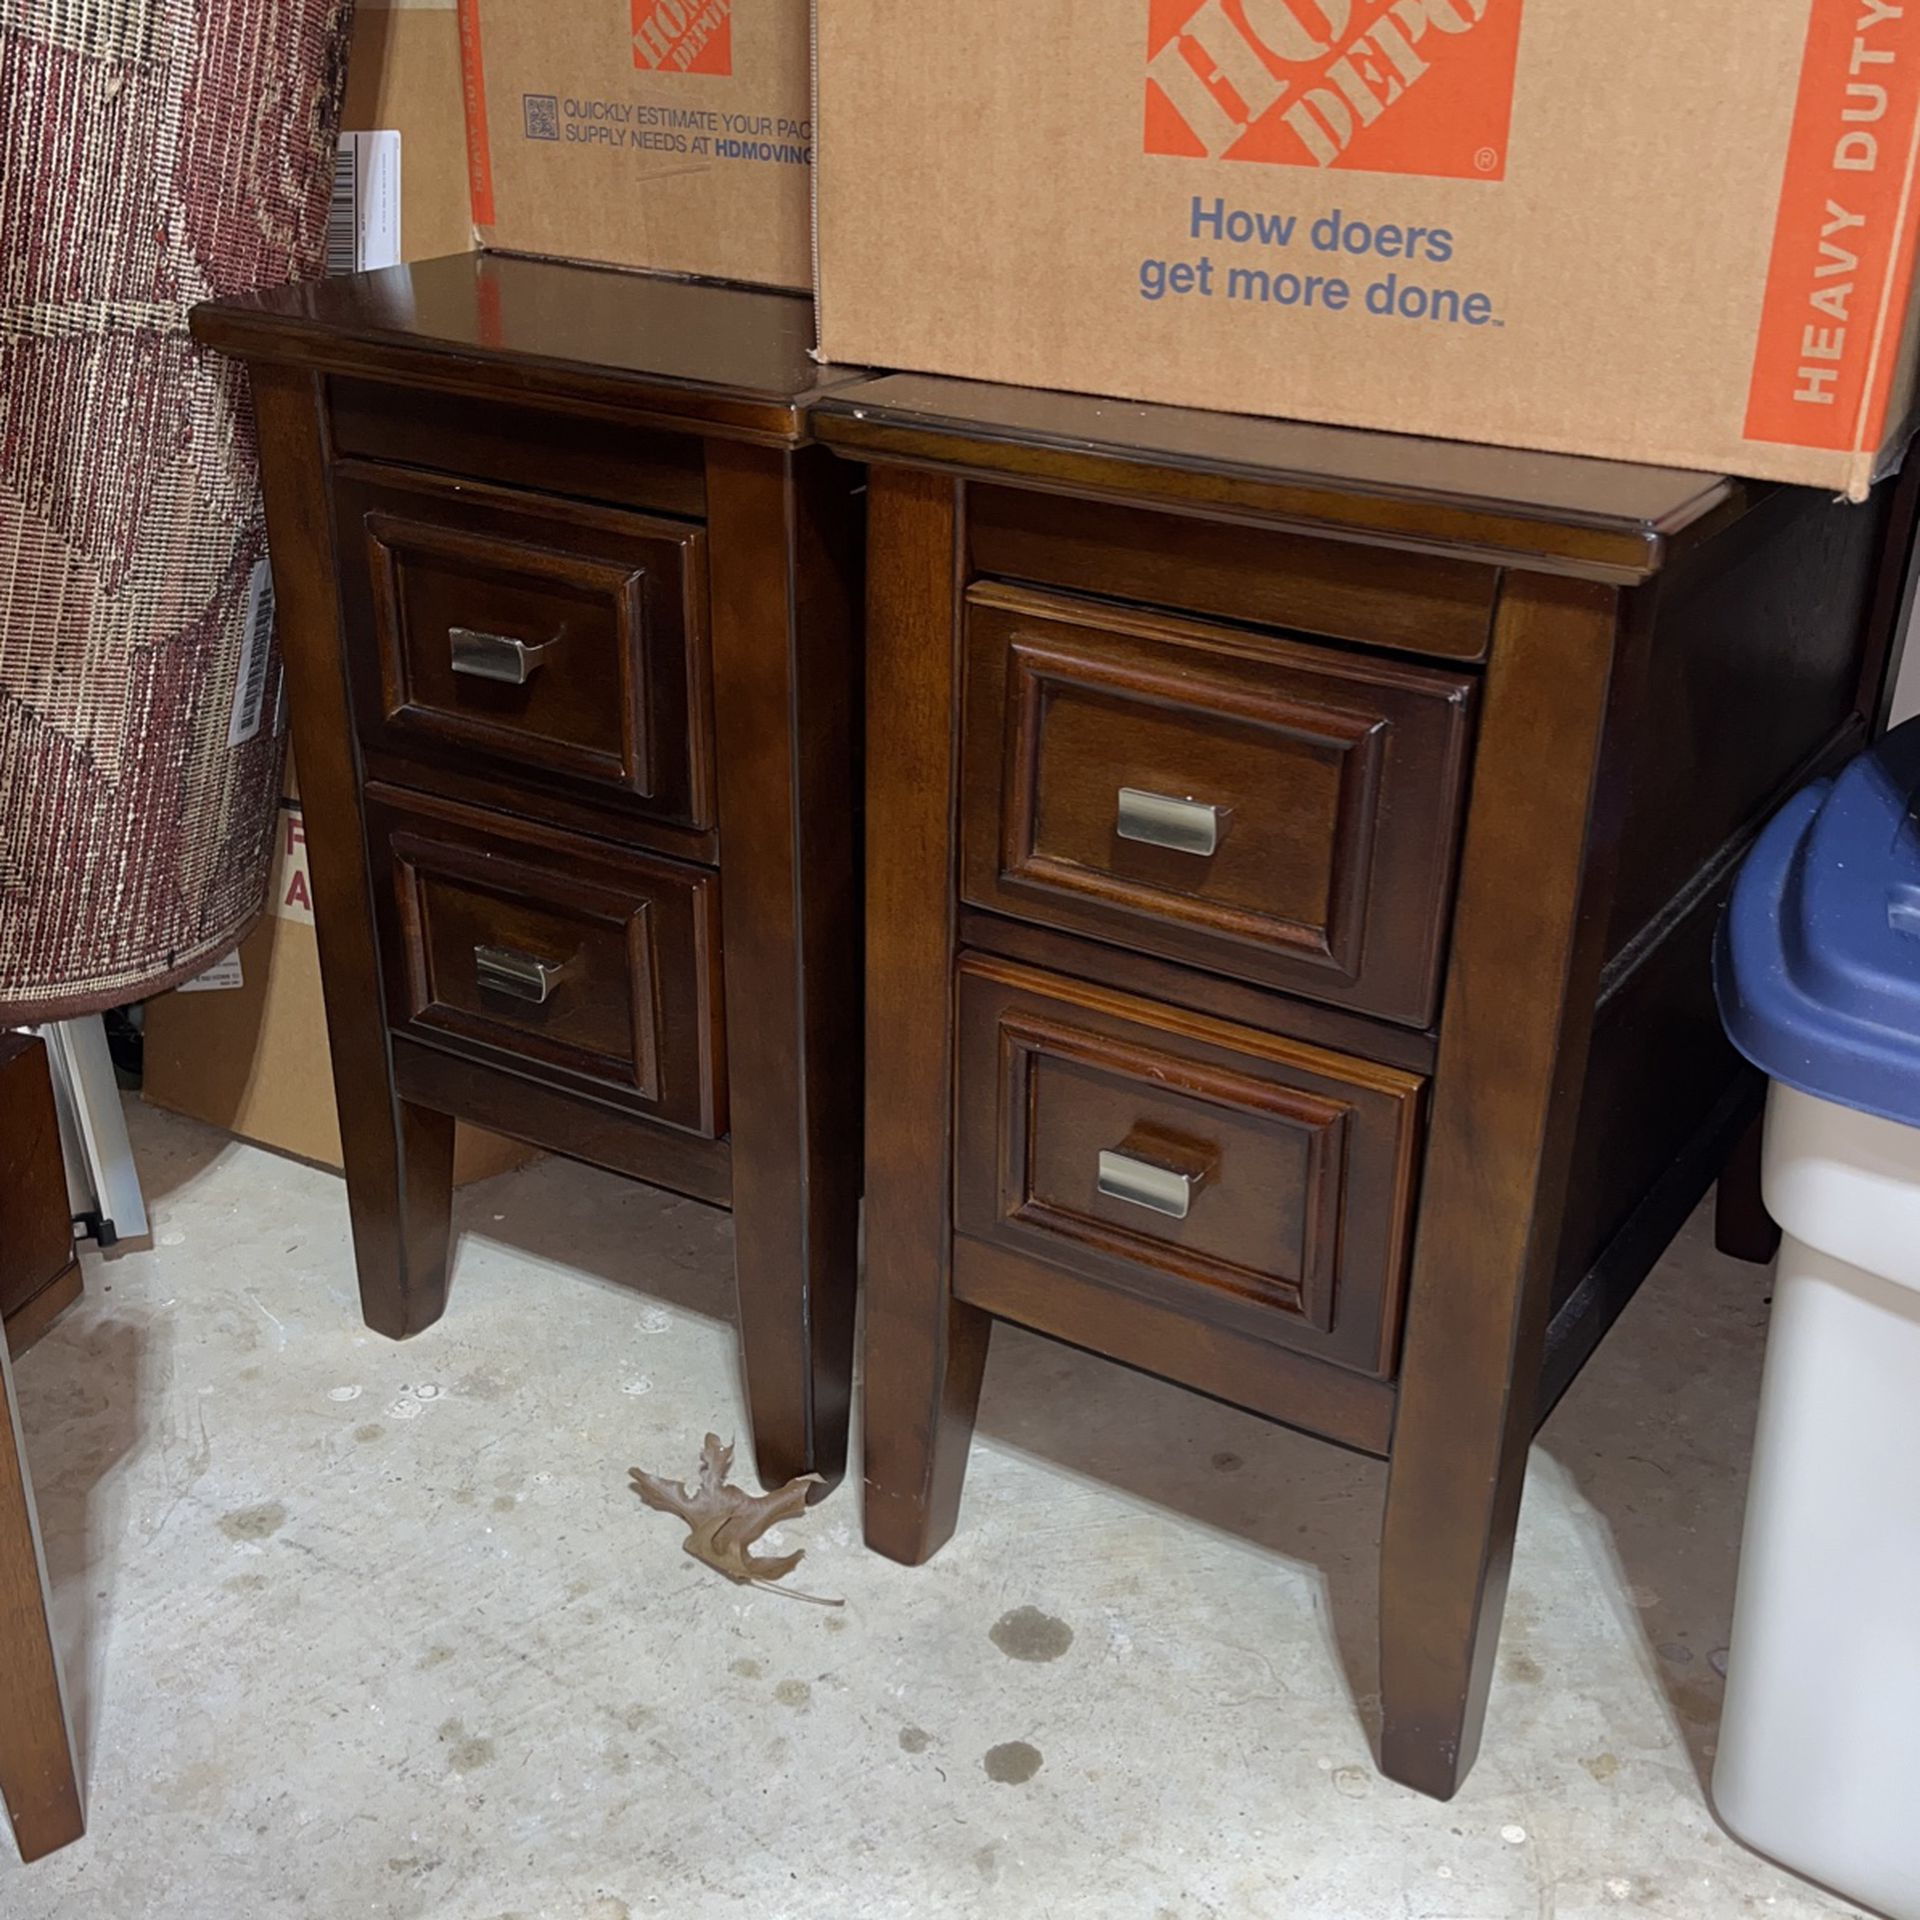 End Tables / Side Tables